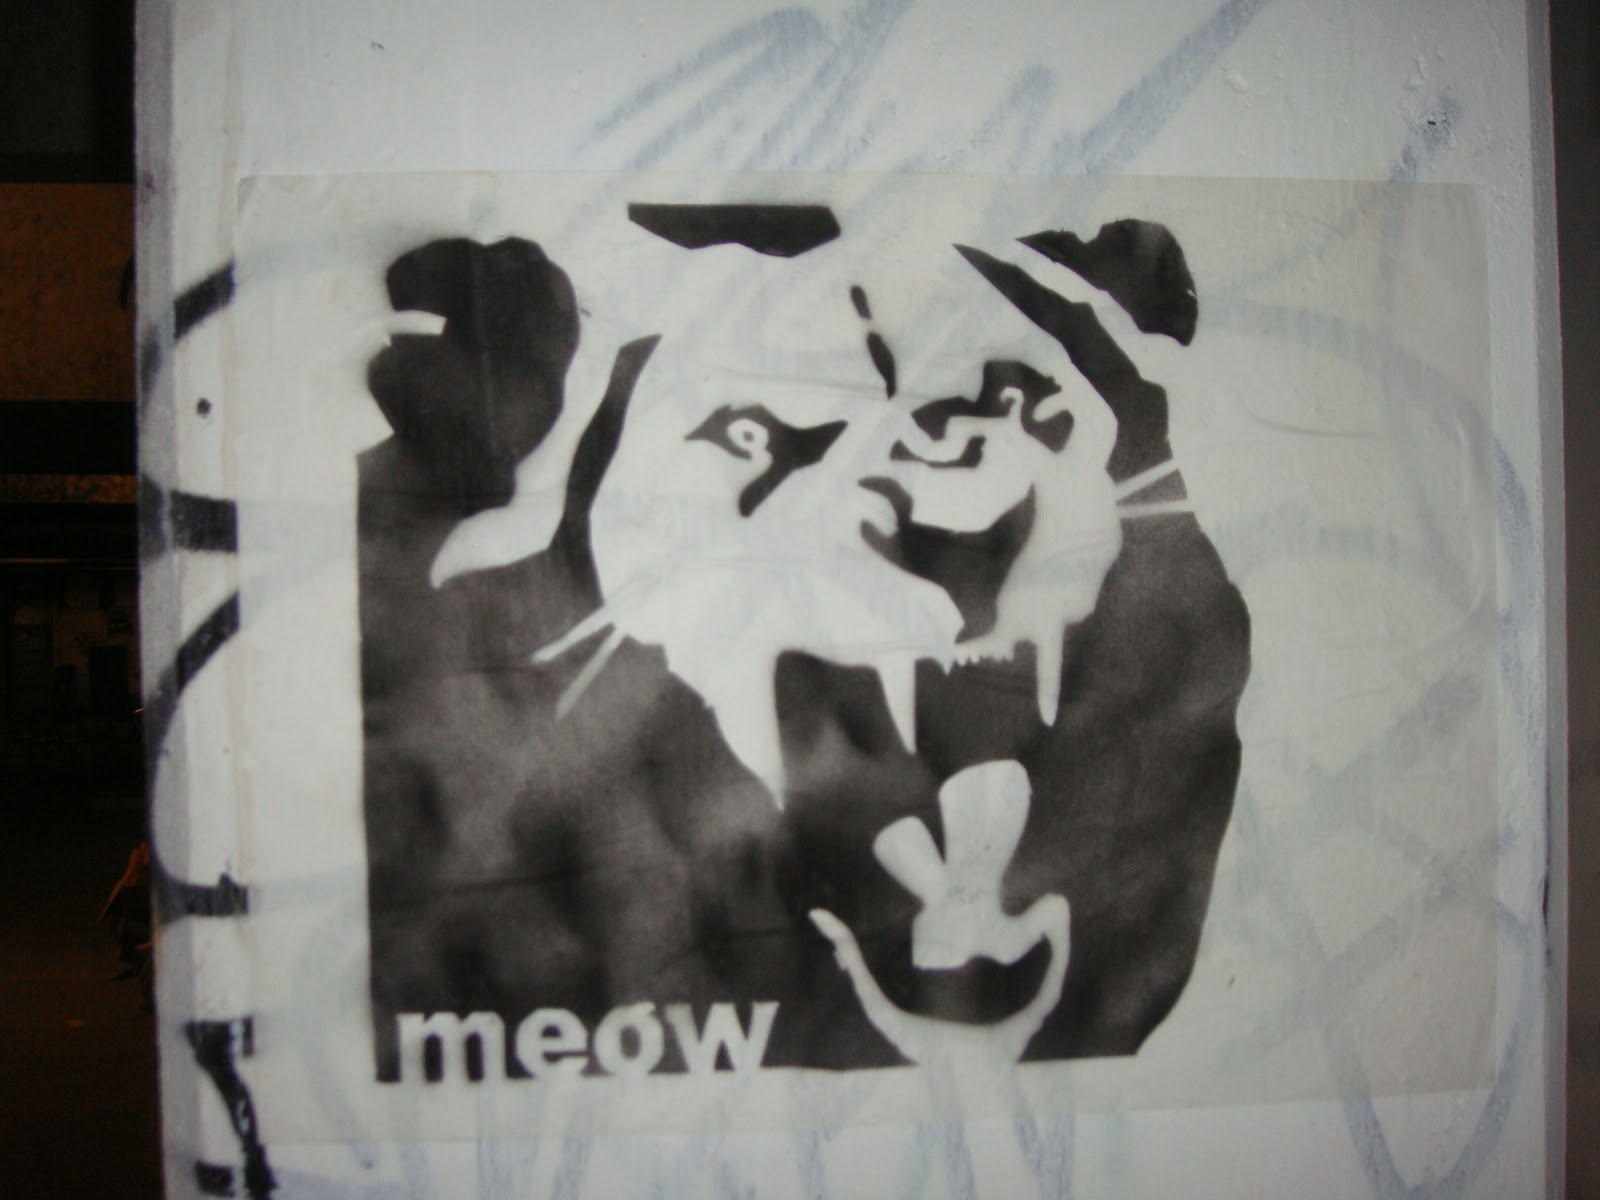 Melbourne S Stencil Art Evolution It All Started With Dog Man